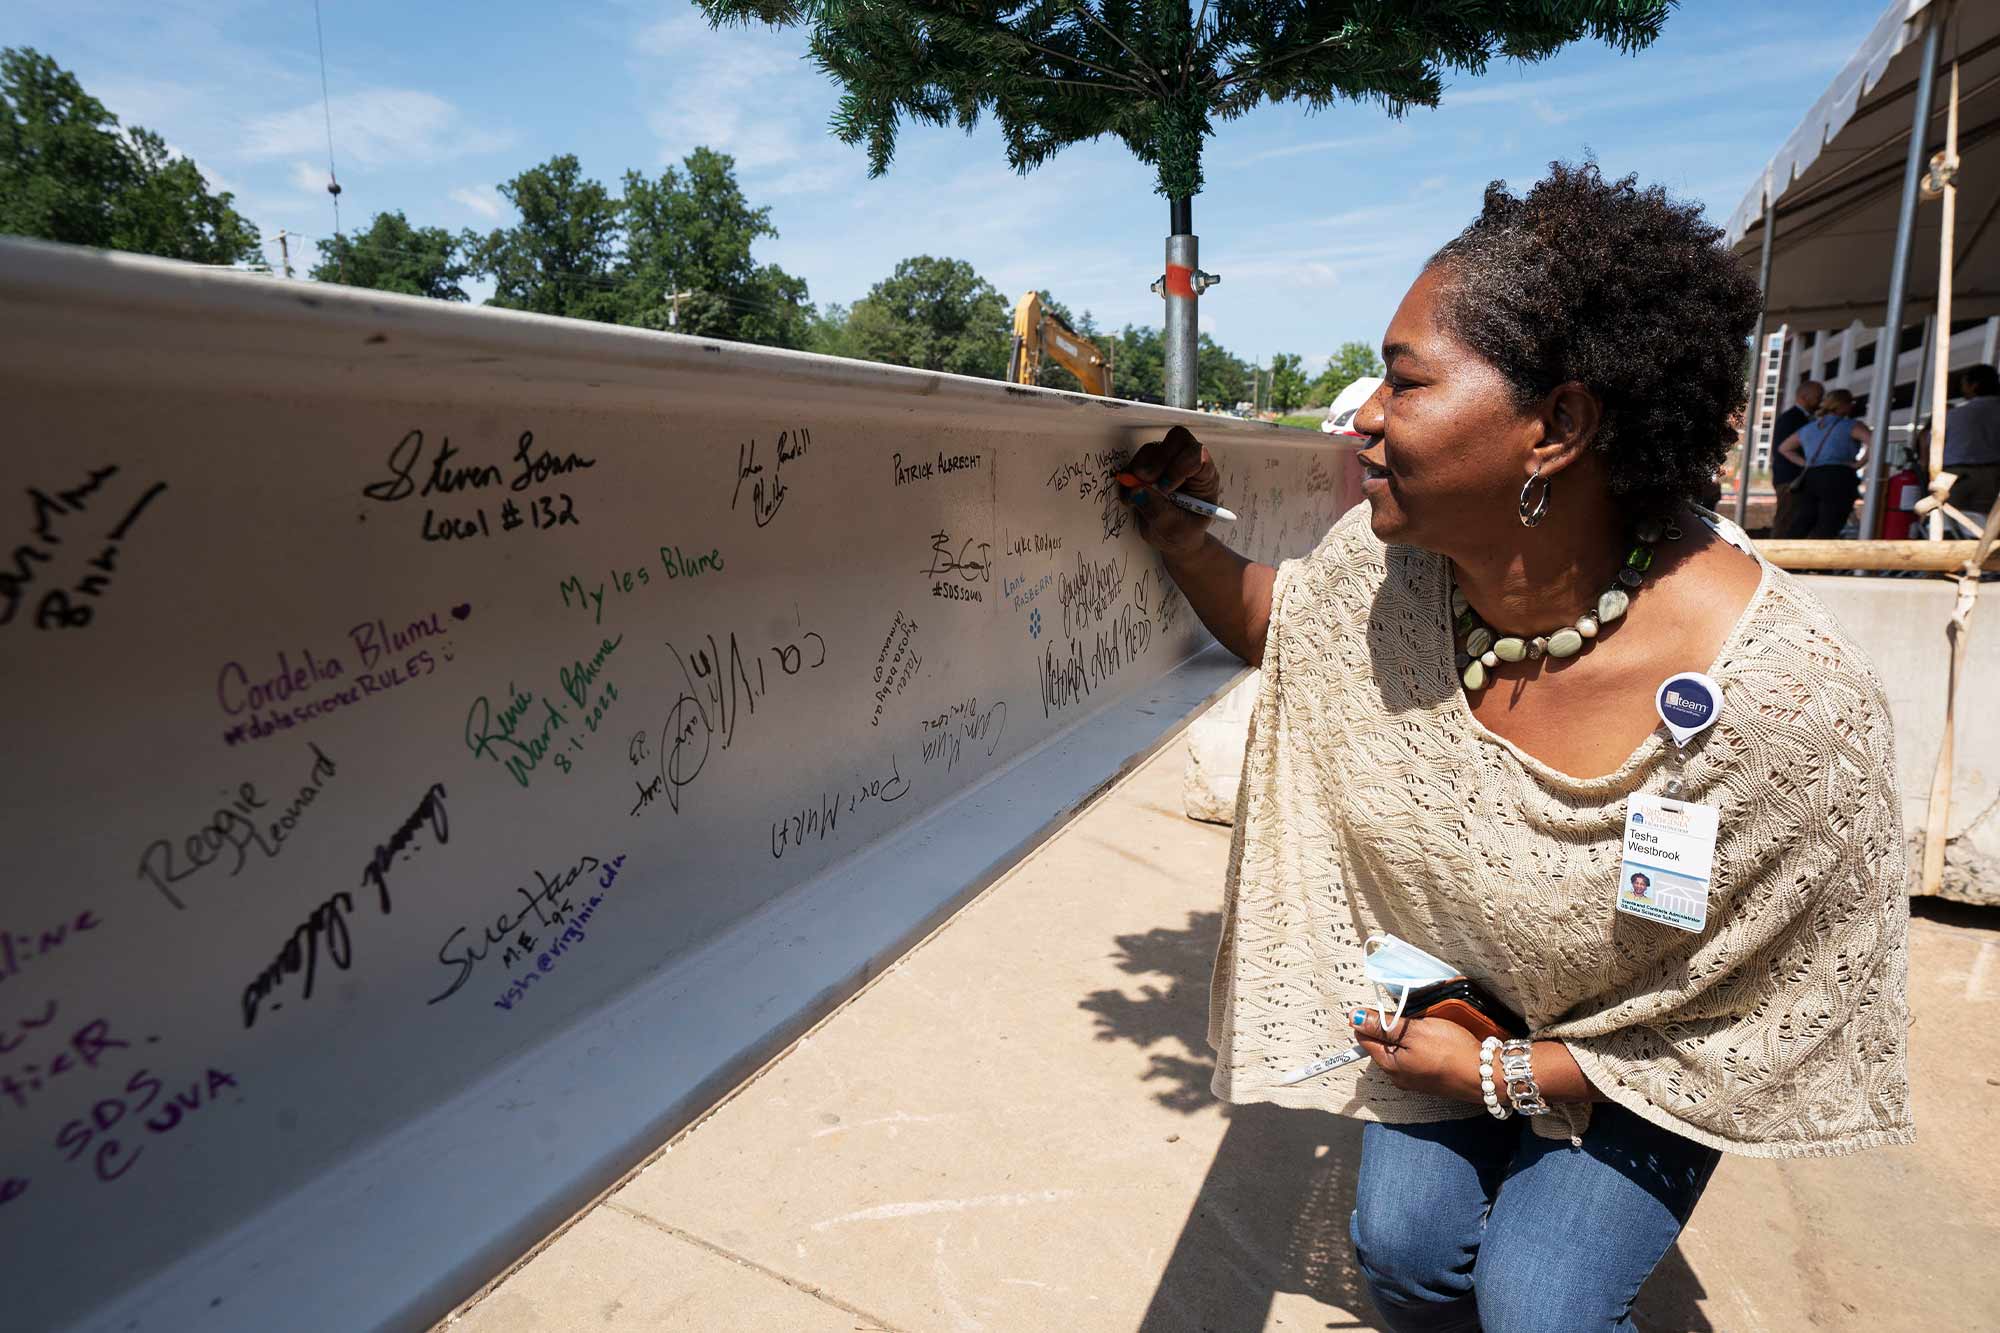 A woman signs her name onto a steel girder already covered in signatures